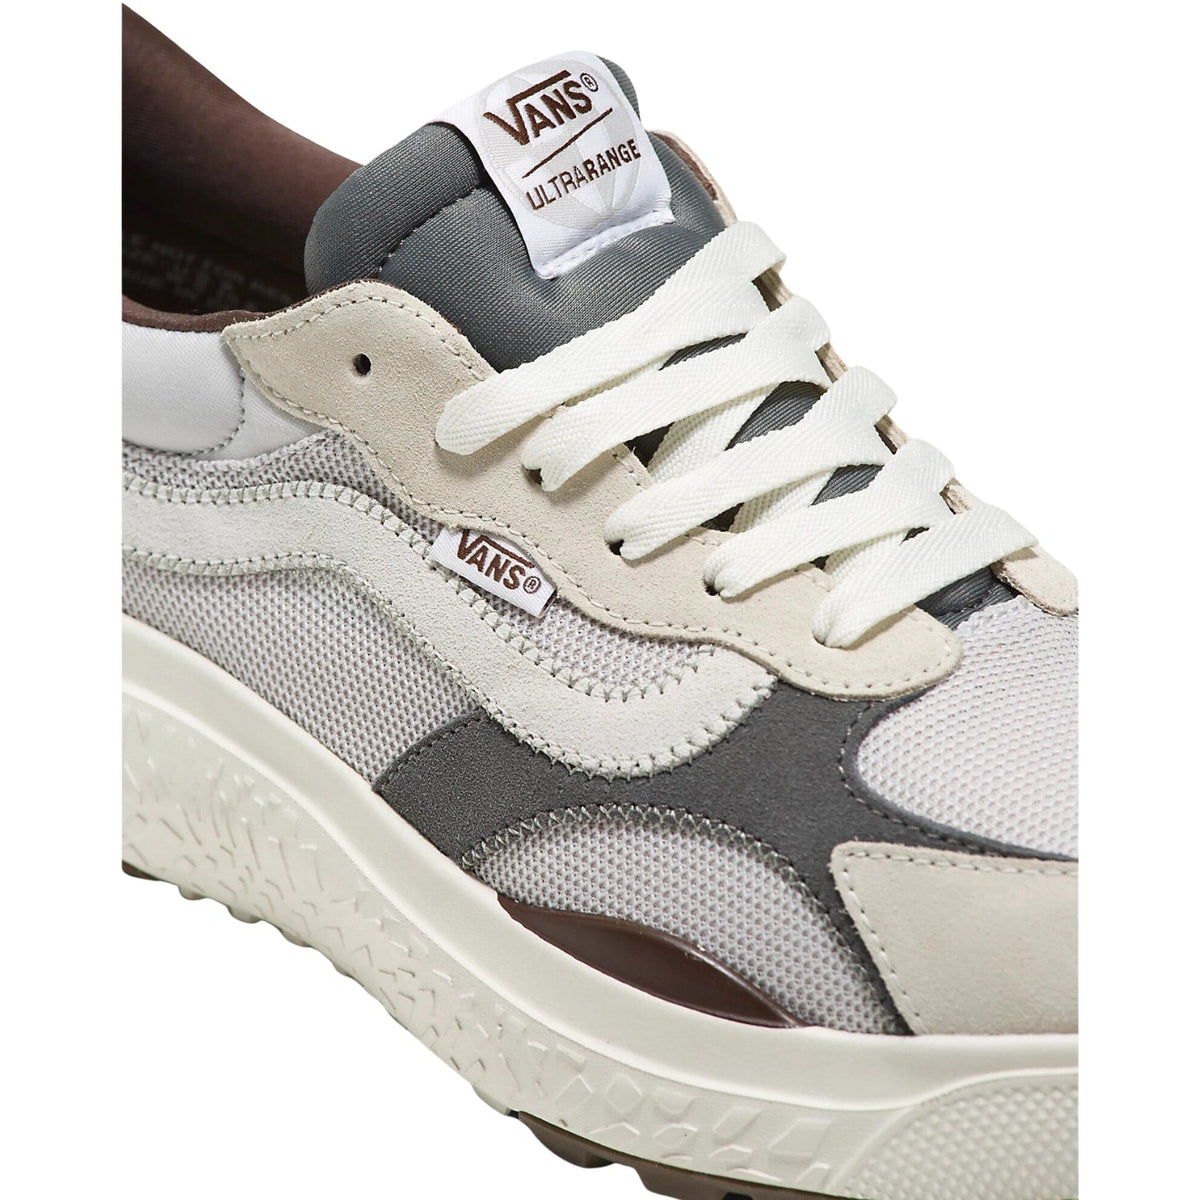 Vans Ultrarange Neo VR3 Mikey February Shoes - White/Multi - Mens Running Shoes/Trainers by Vans